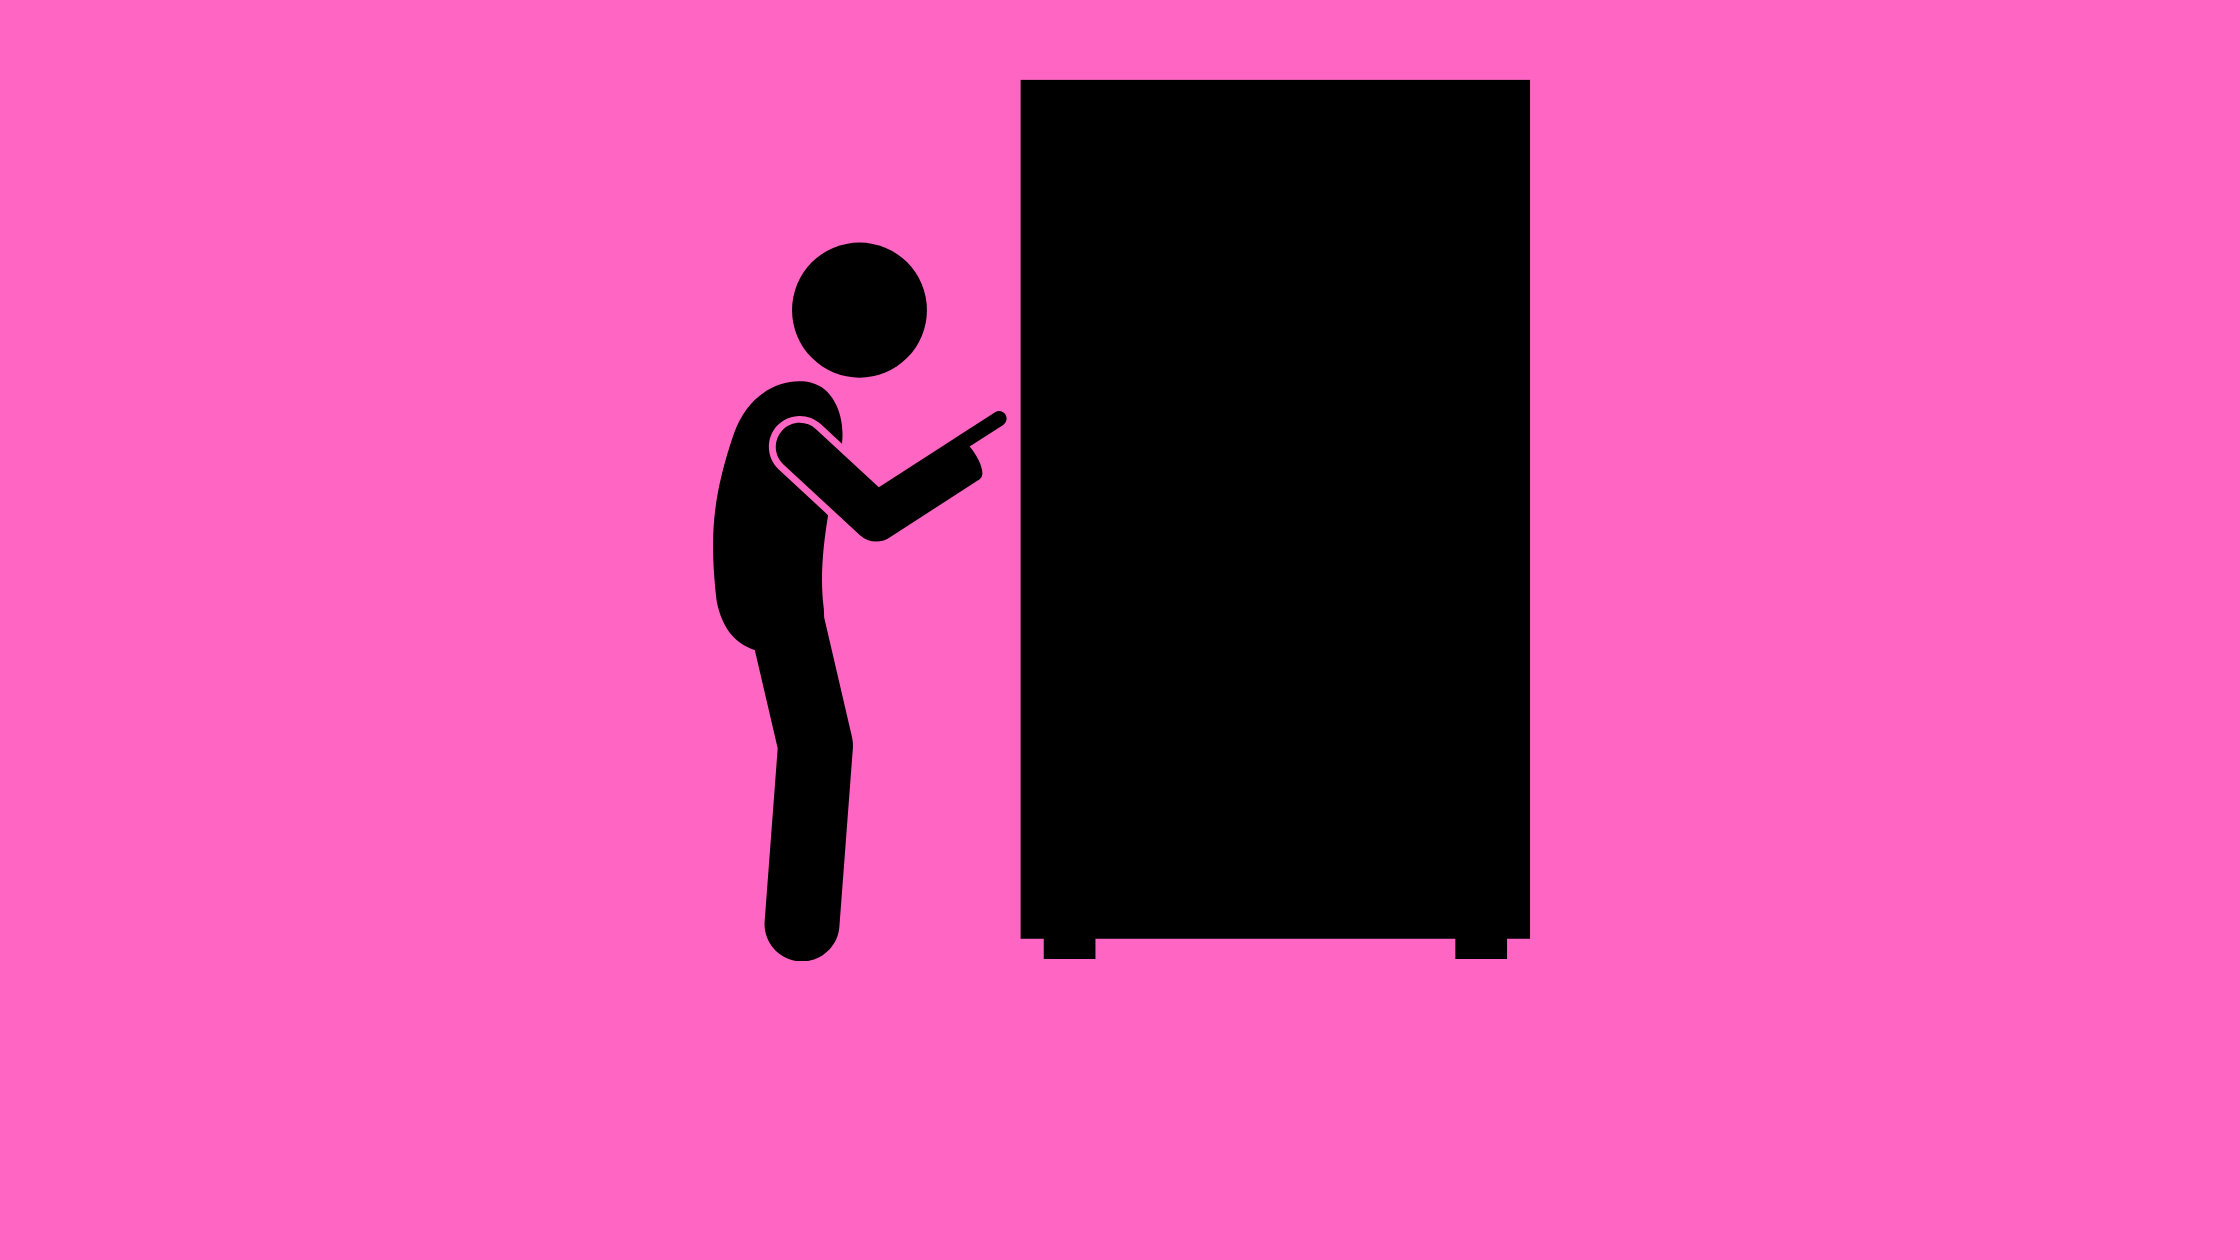 illustration of a person pressing a button on a vending machine